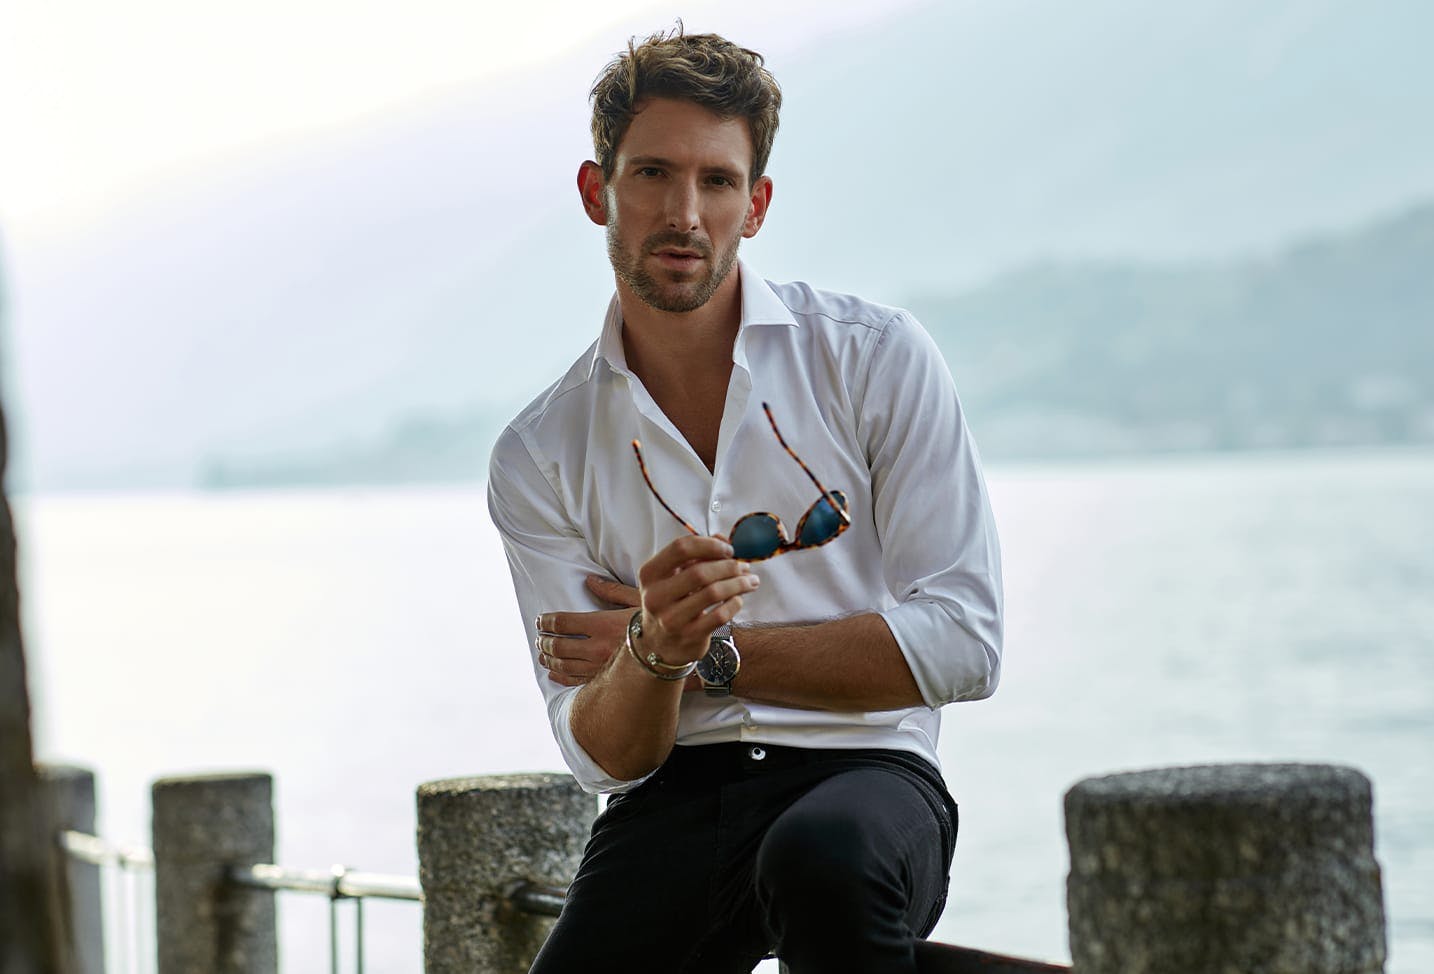 a man sitting by the pier wearing a white shirt, black pants, and holding sunglasses